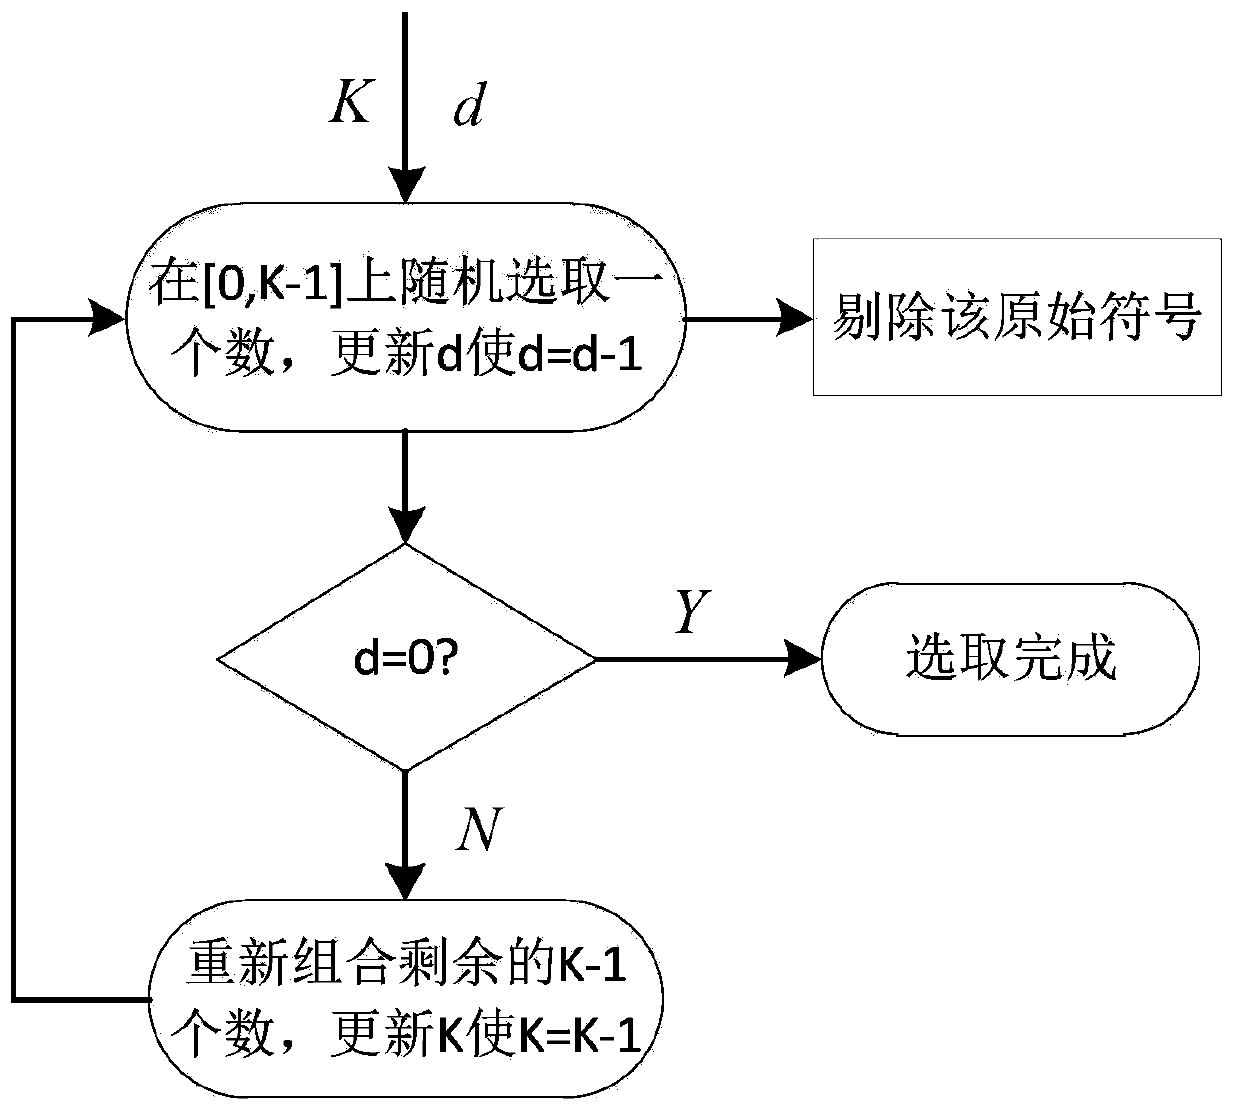 A method of encoding and decoding of digital fountain code based on arm